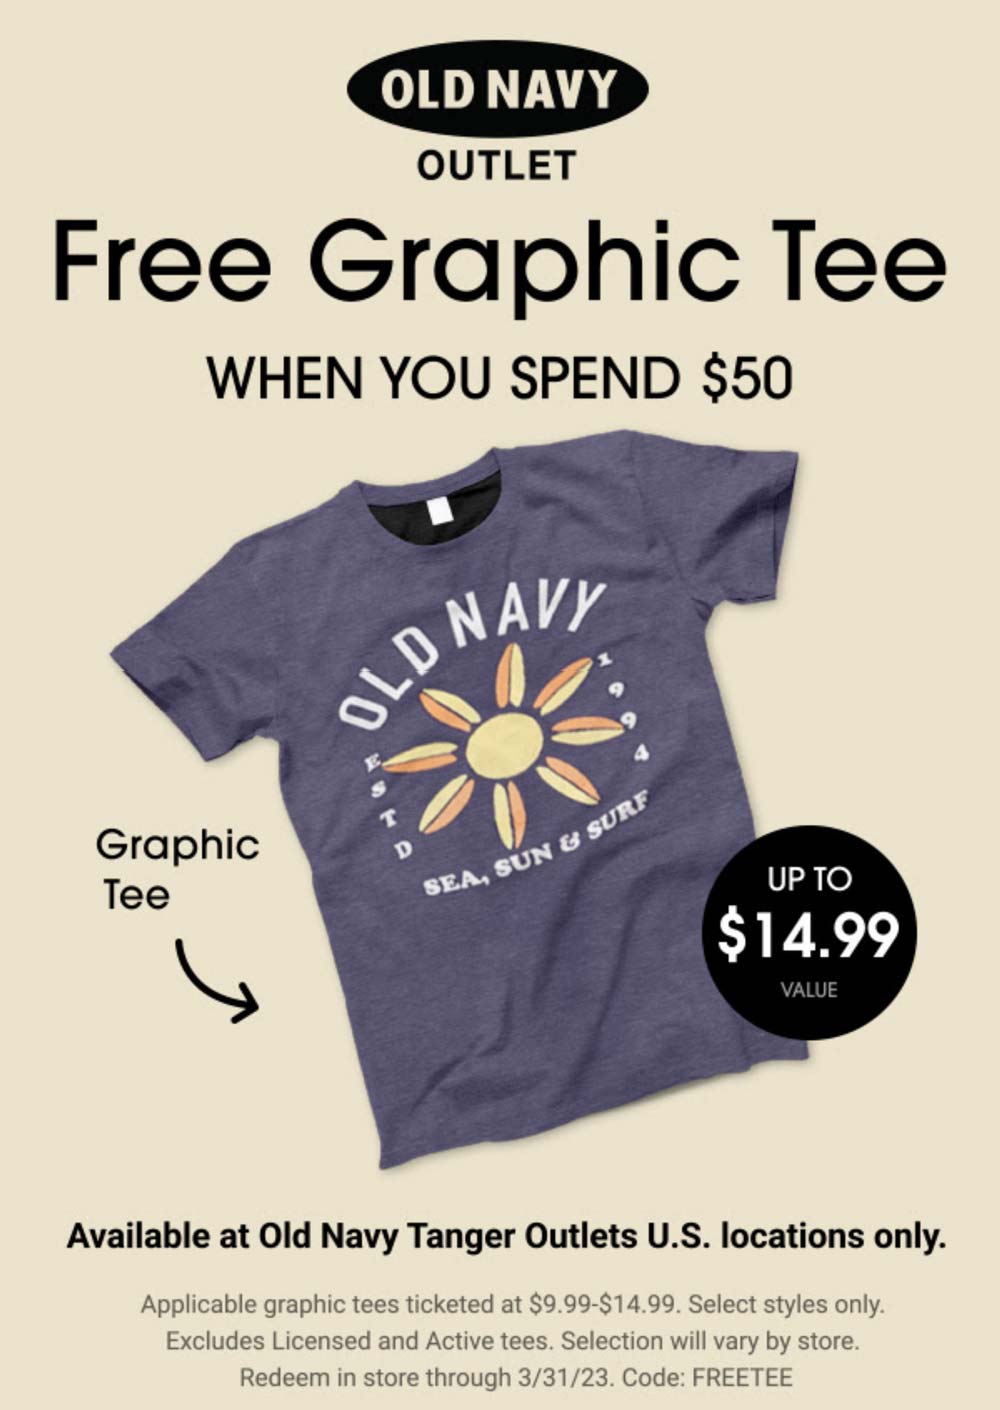 Old Navy Outlet stores Coupon  Free $15 graphic tee on $50 at Old Navy Outlet #oldnavyoutlet 